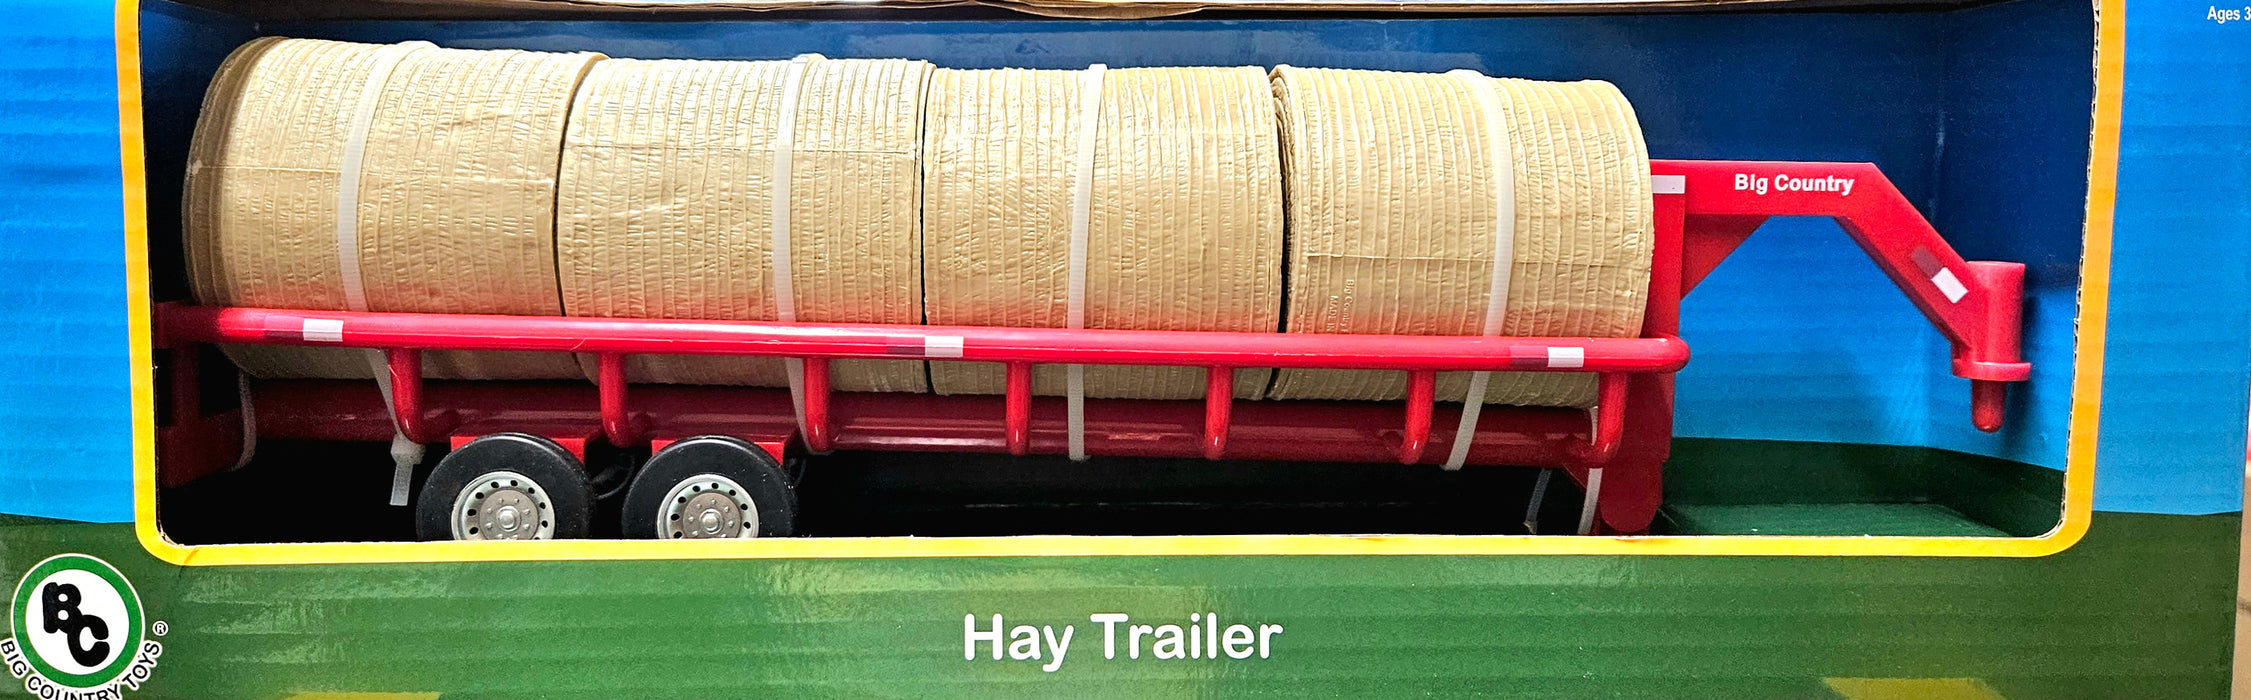 1/20 BIG COUNTRY TOY HAY TRAILER